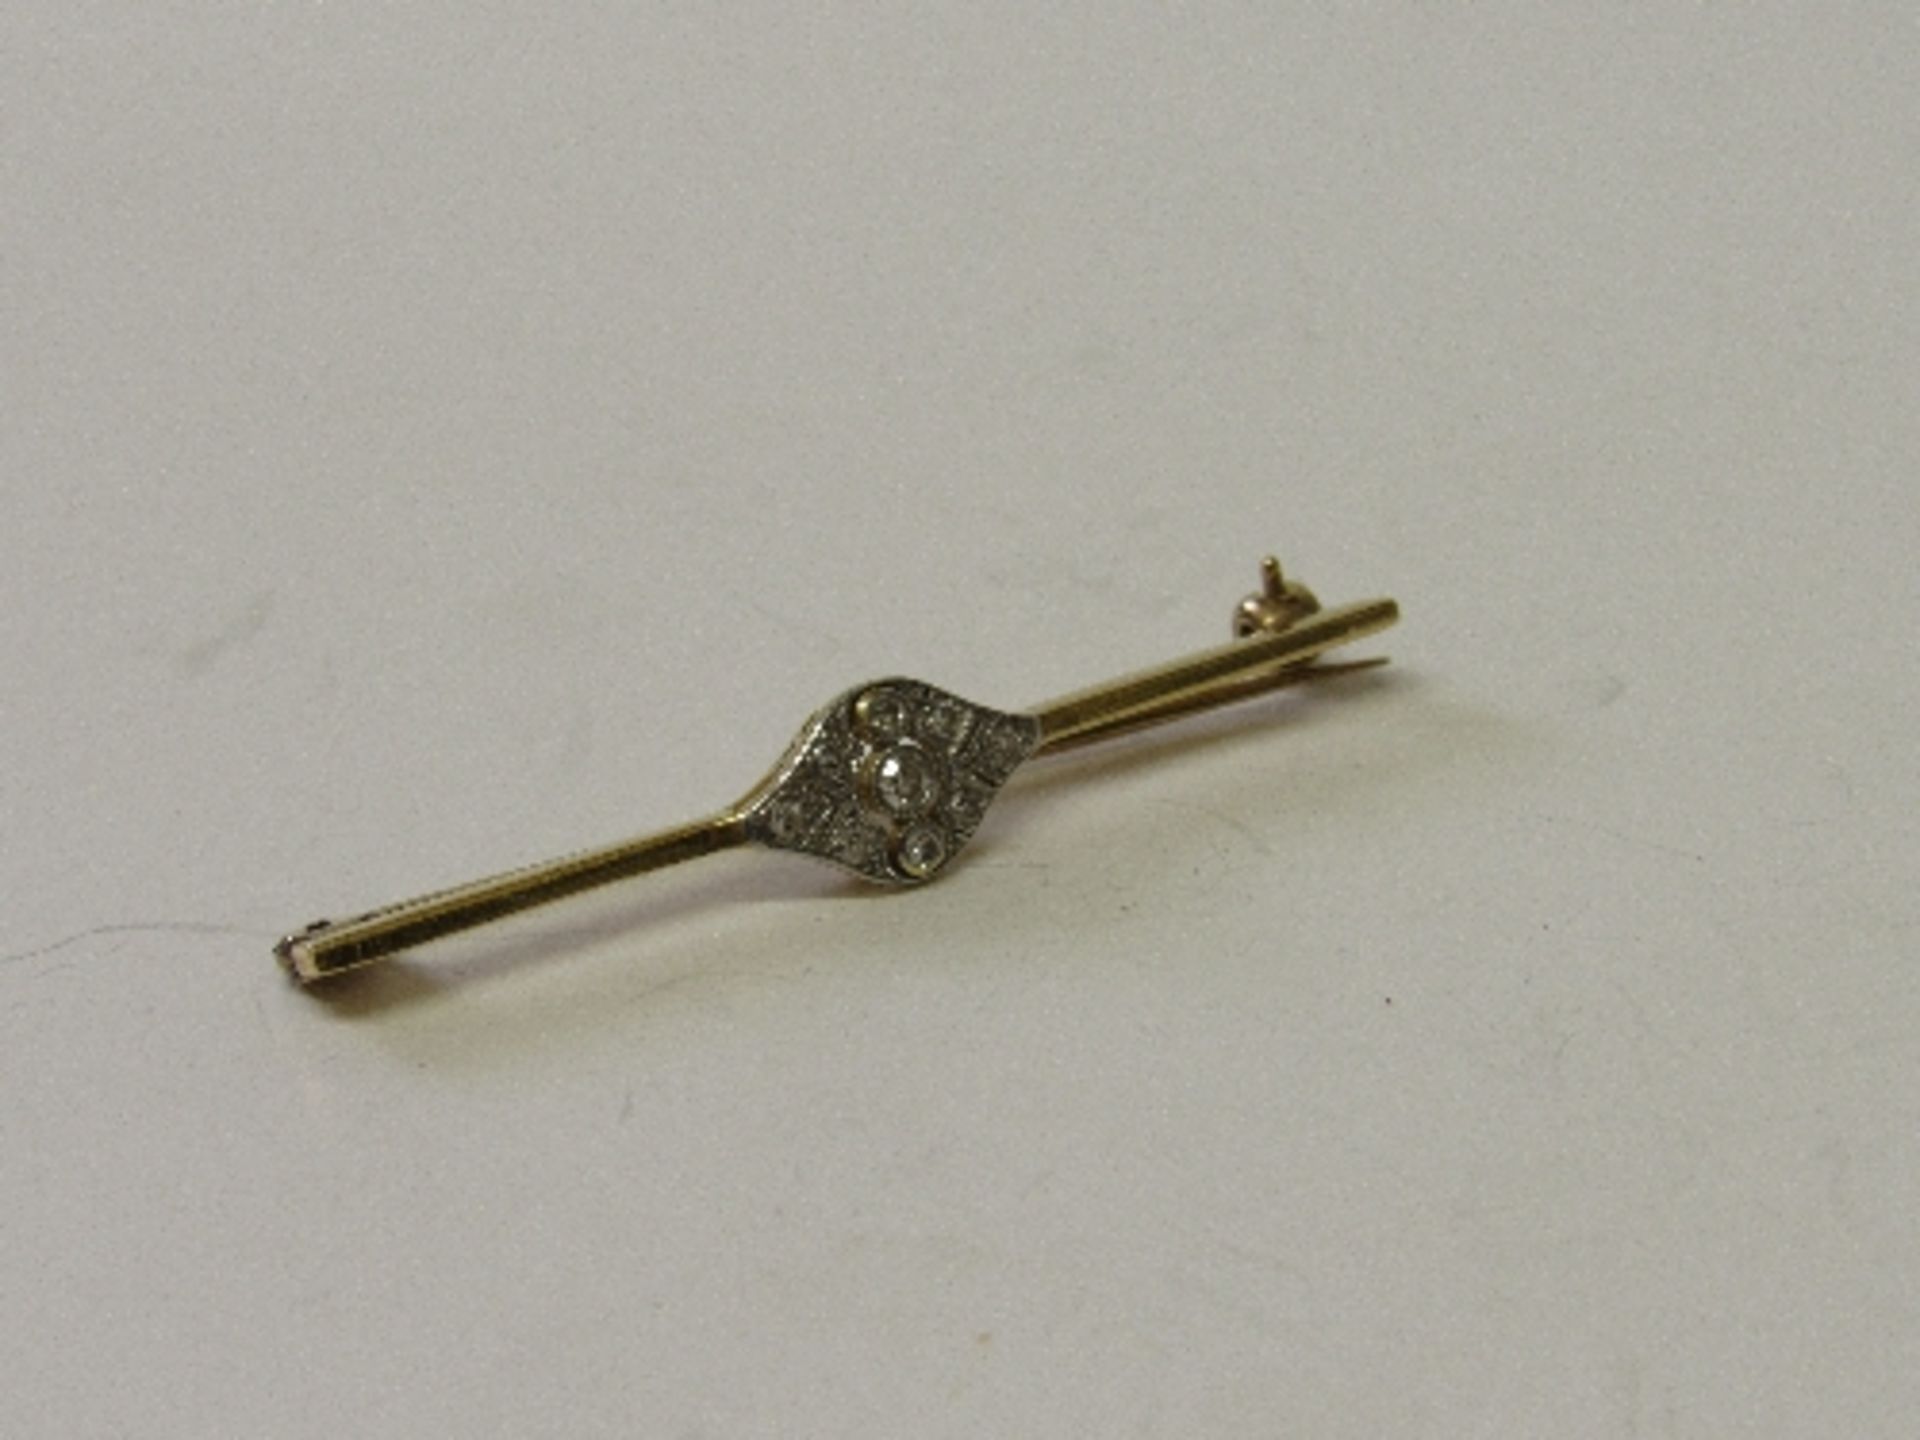 Diamond & gold coloured metal tie-pin, weight 3.9gms. Estimate £80-100. - Image 3 of 3